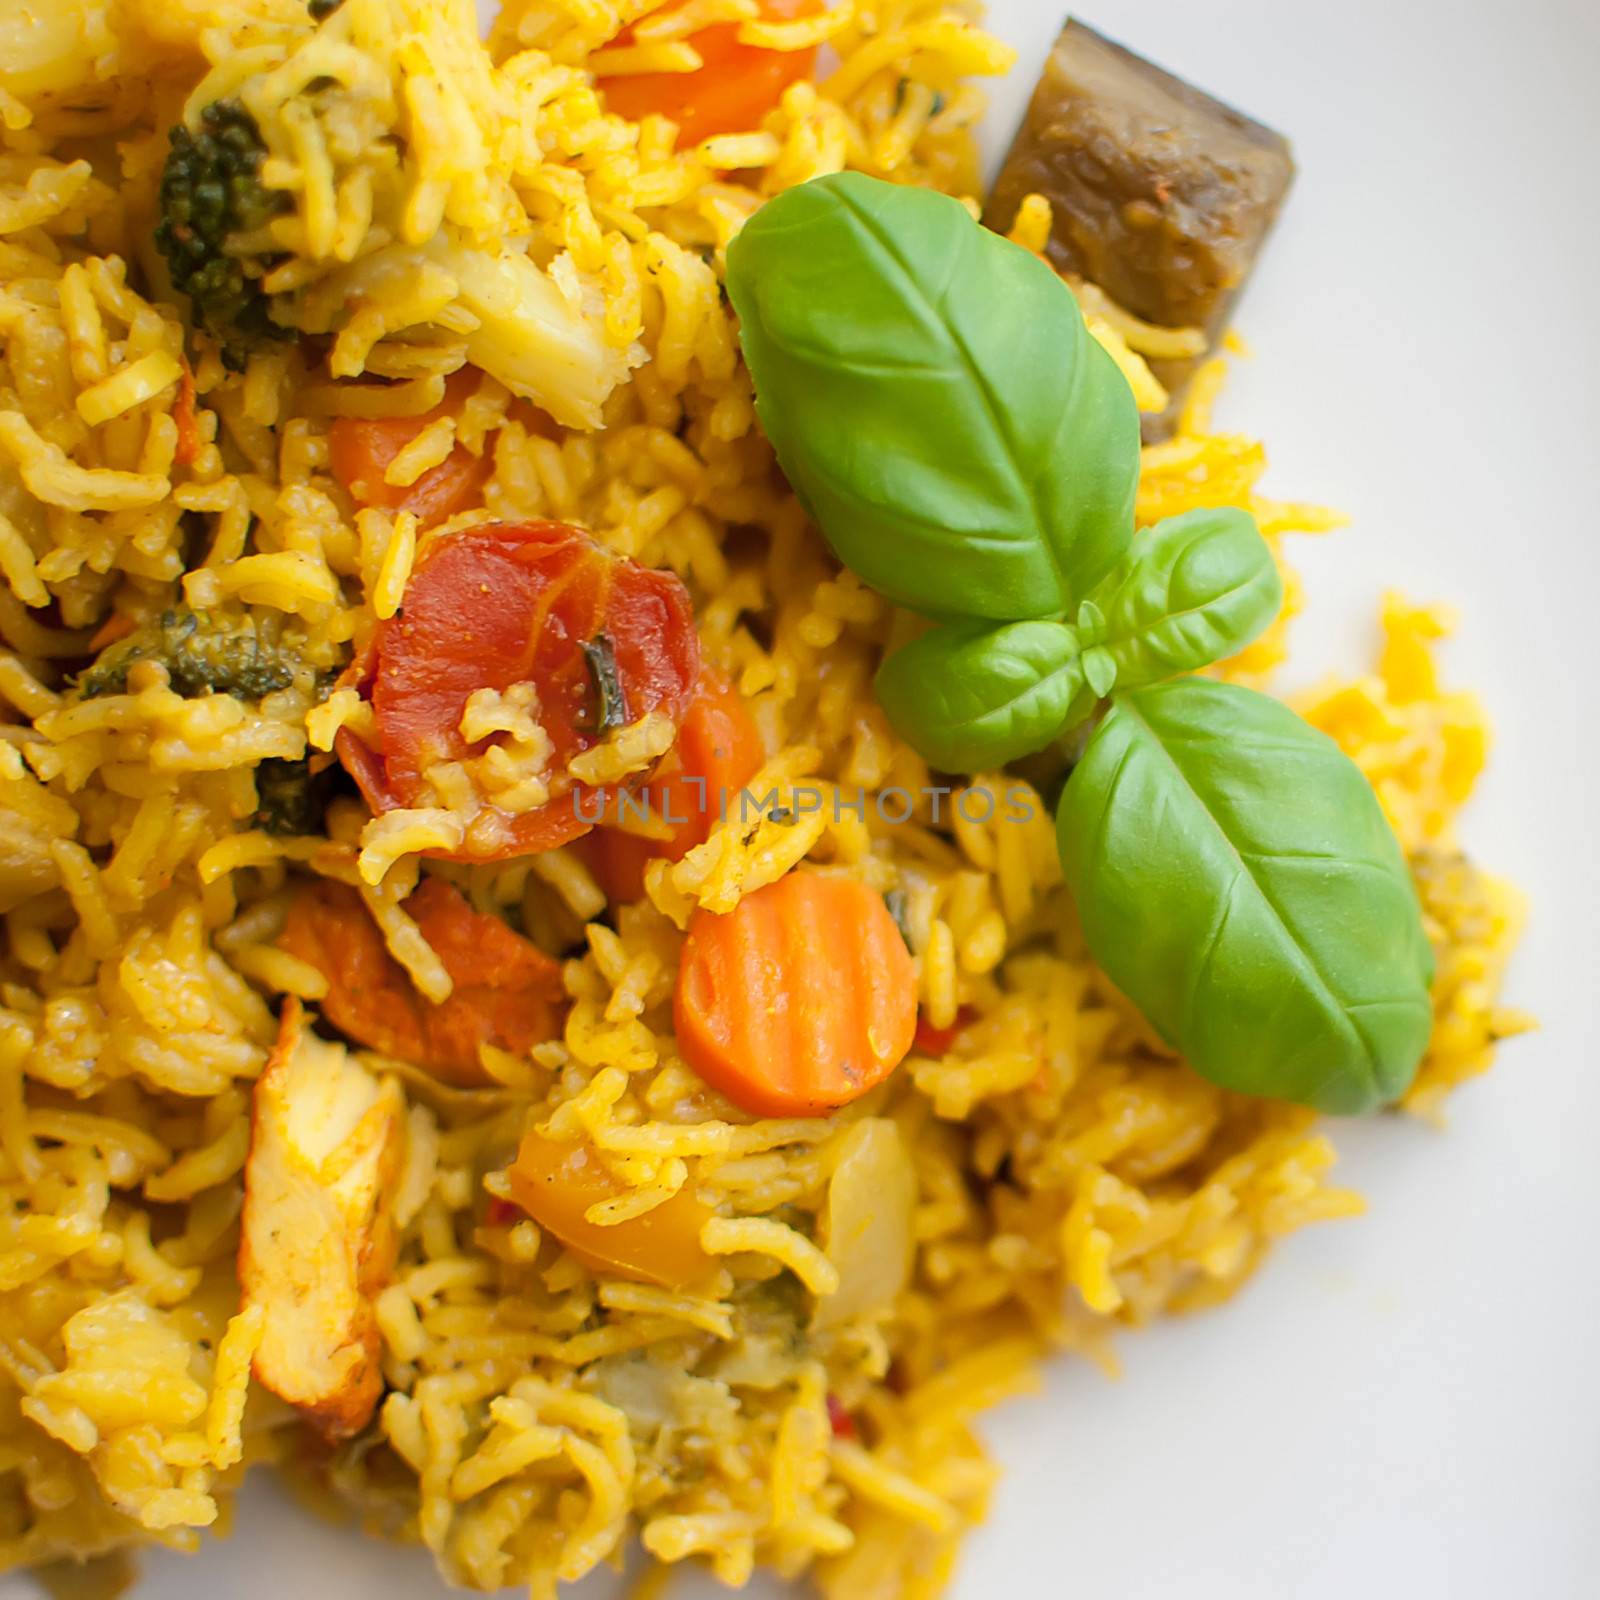 basmati rice with vegetables and chicken by Dessie_bg